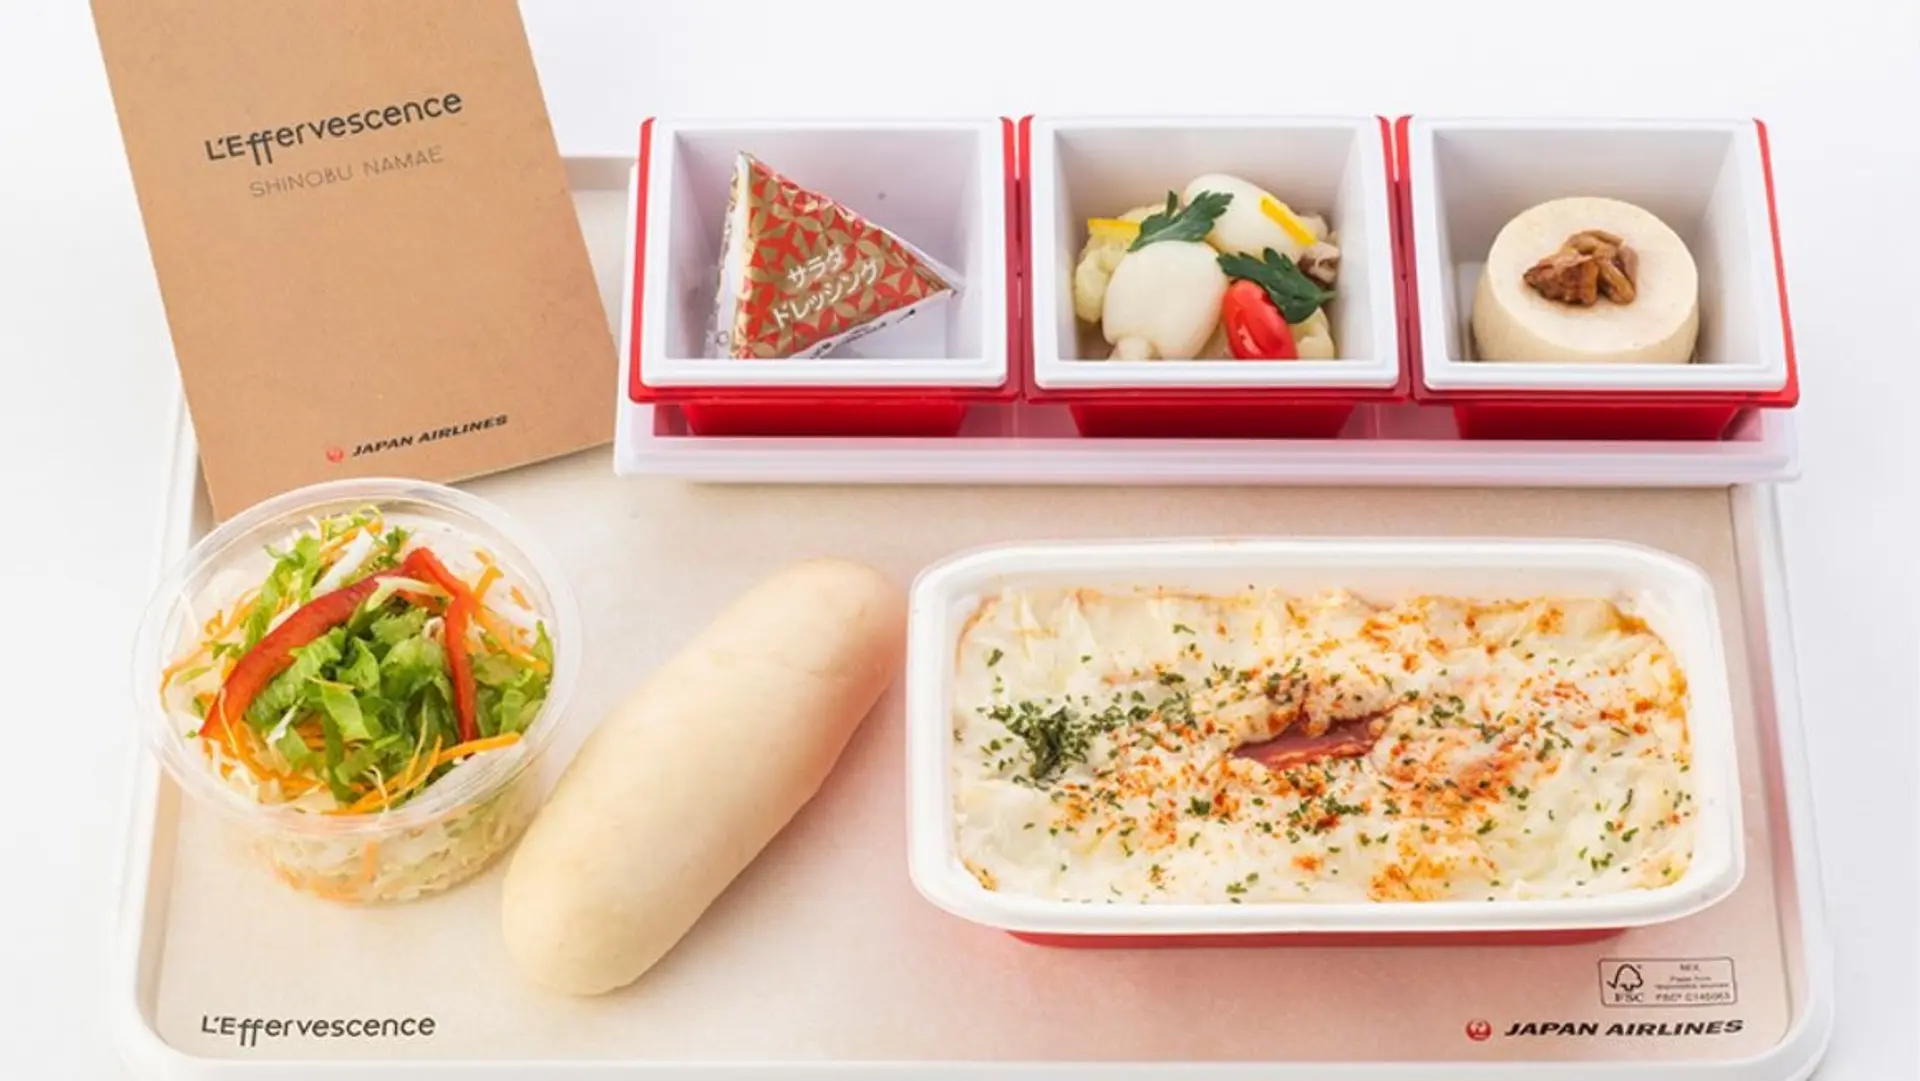 Airline review Cuisine - Japan Airlines - 5